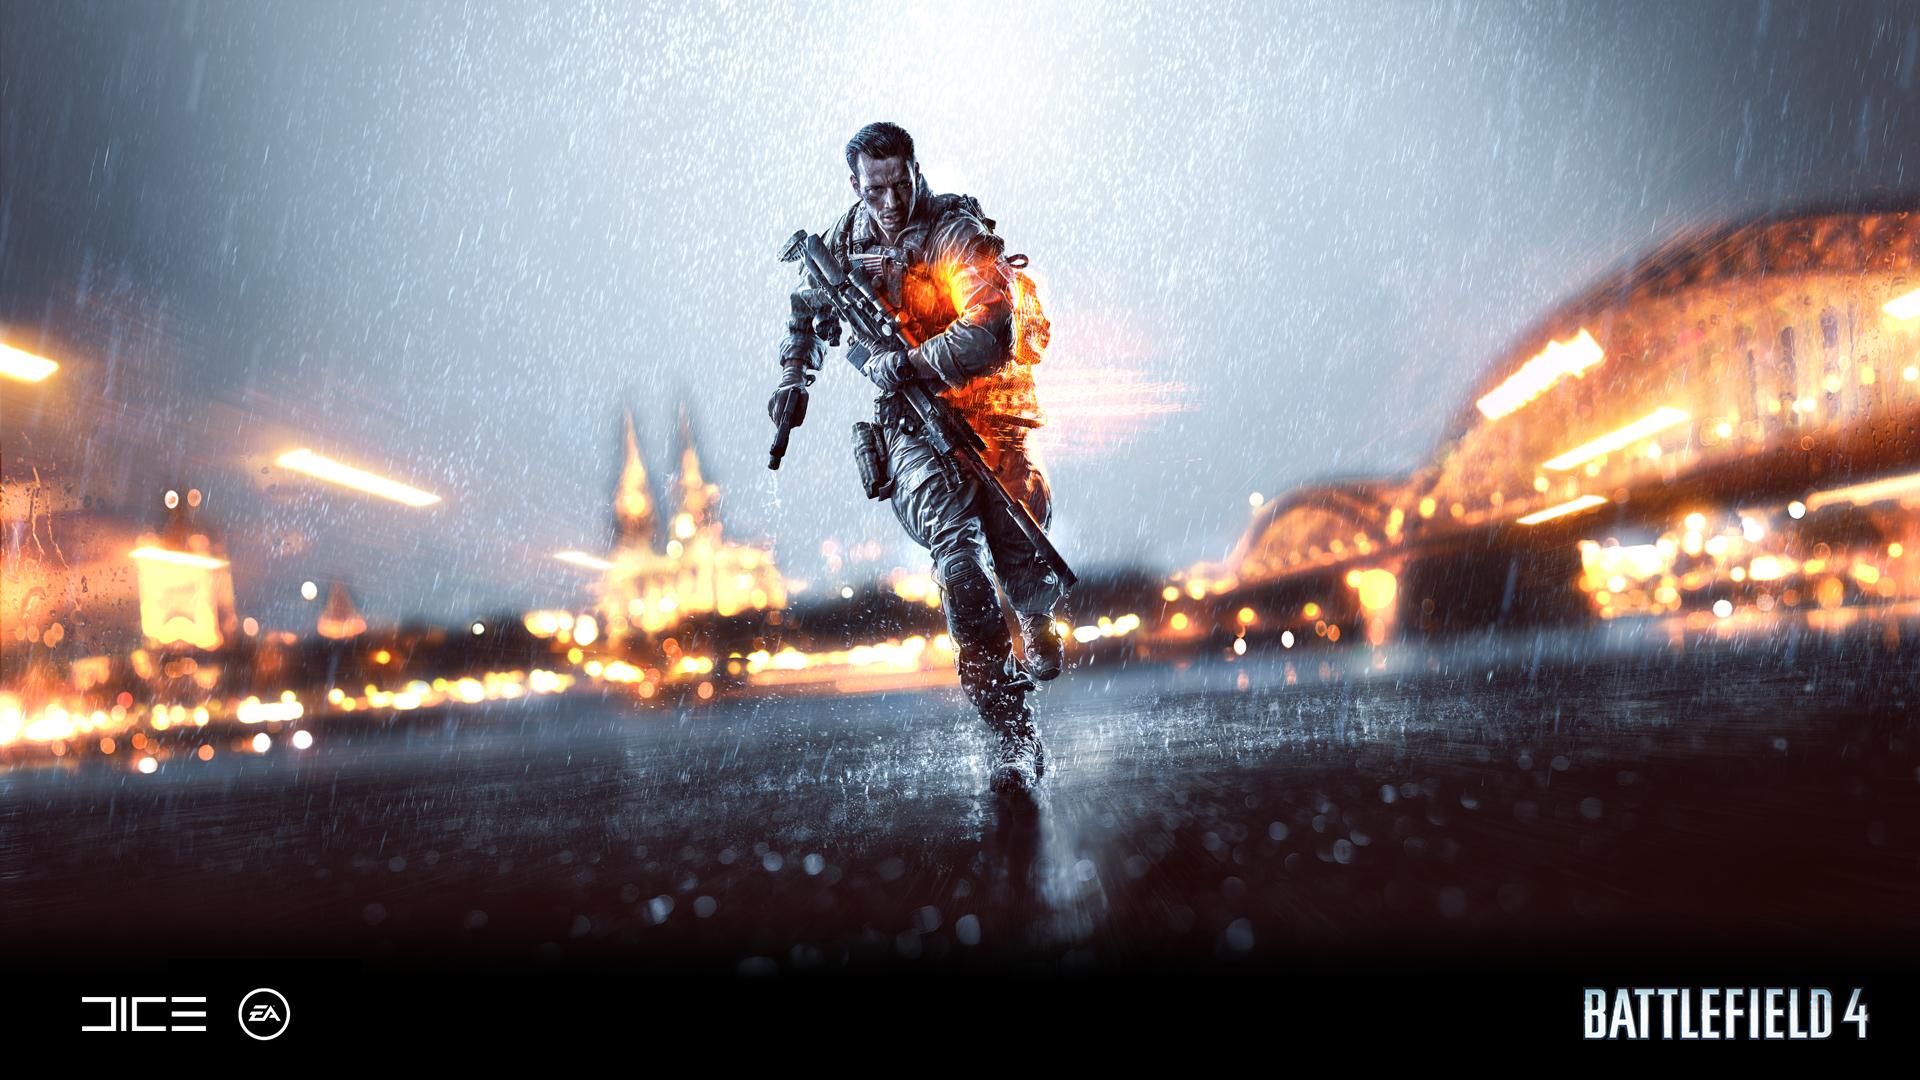 Battlefield 4 HD Wallpapers And Photos download